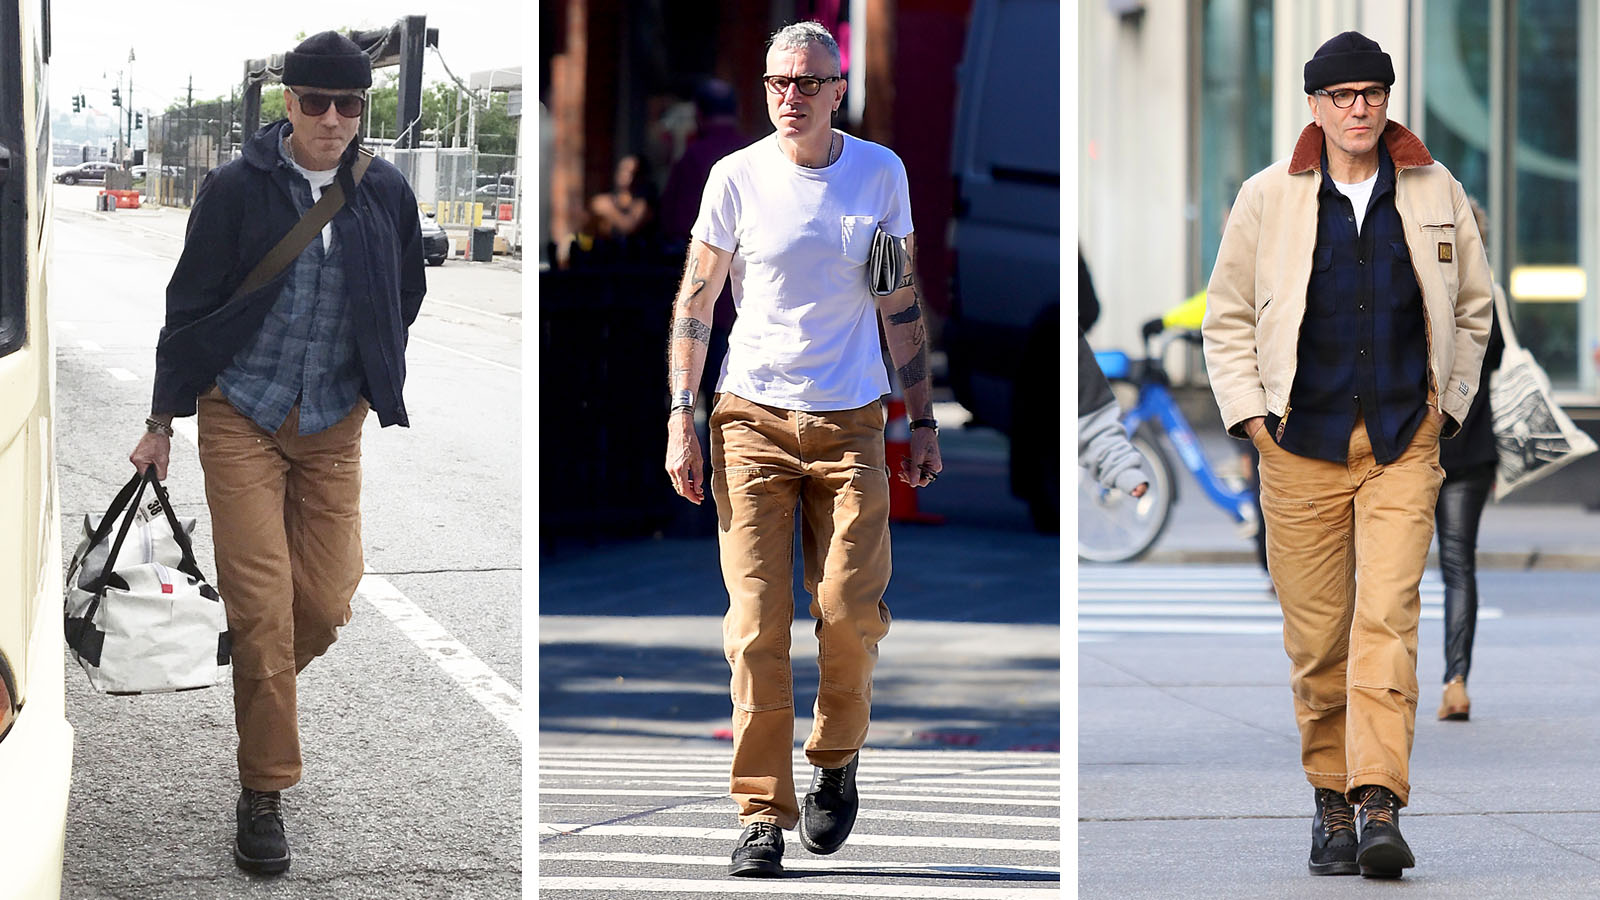 A Lesson In Ageless Style From Sir Daniel Day-Lewis | The Journal | MR  PORTER